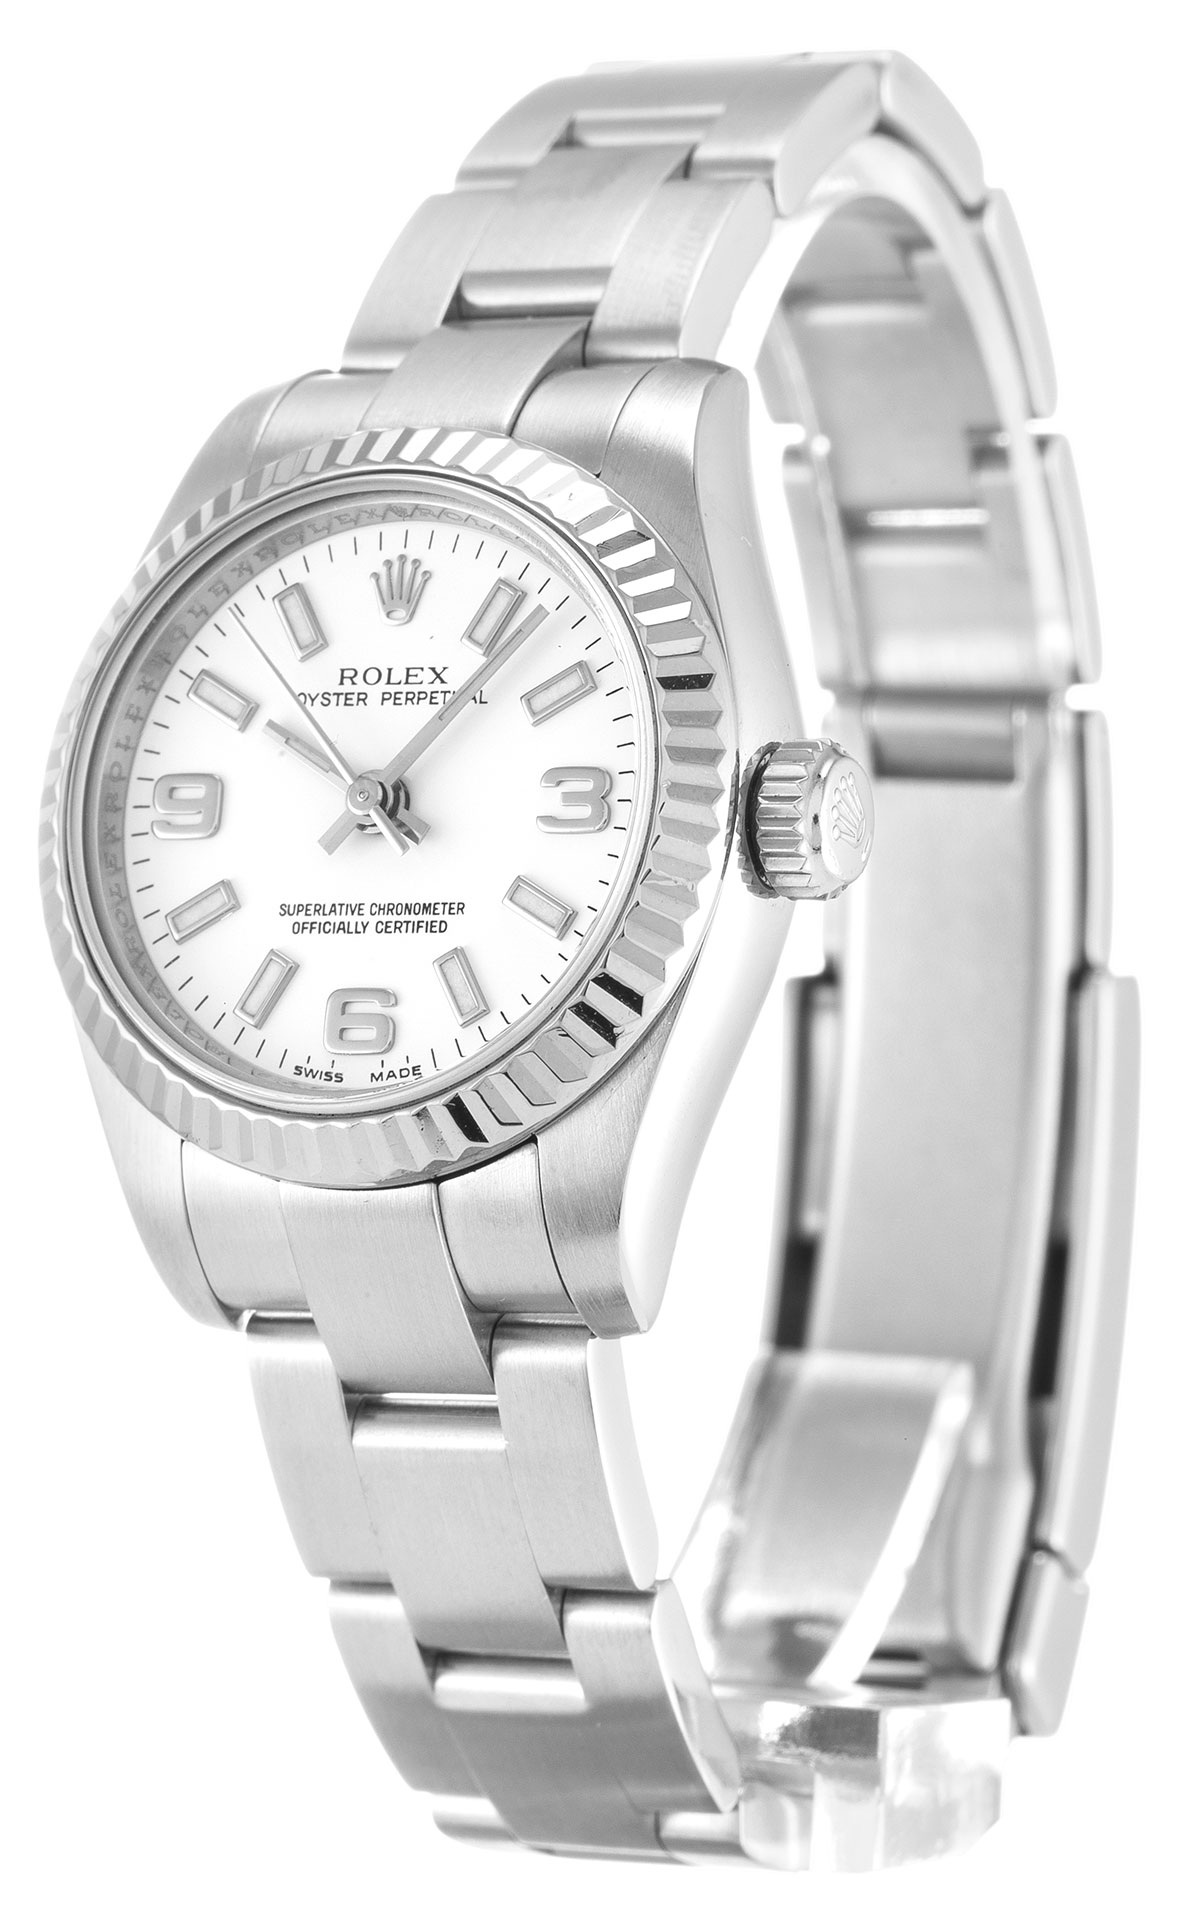 26MM Rolex Lady Oyster Perpetual 176234: The Perfect Timepiece for Women